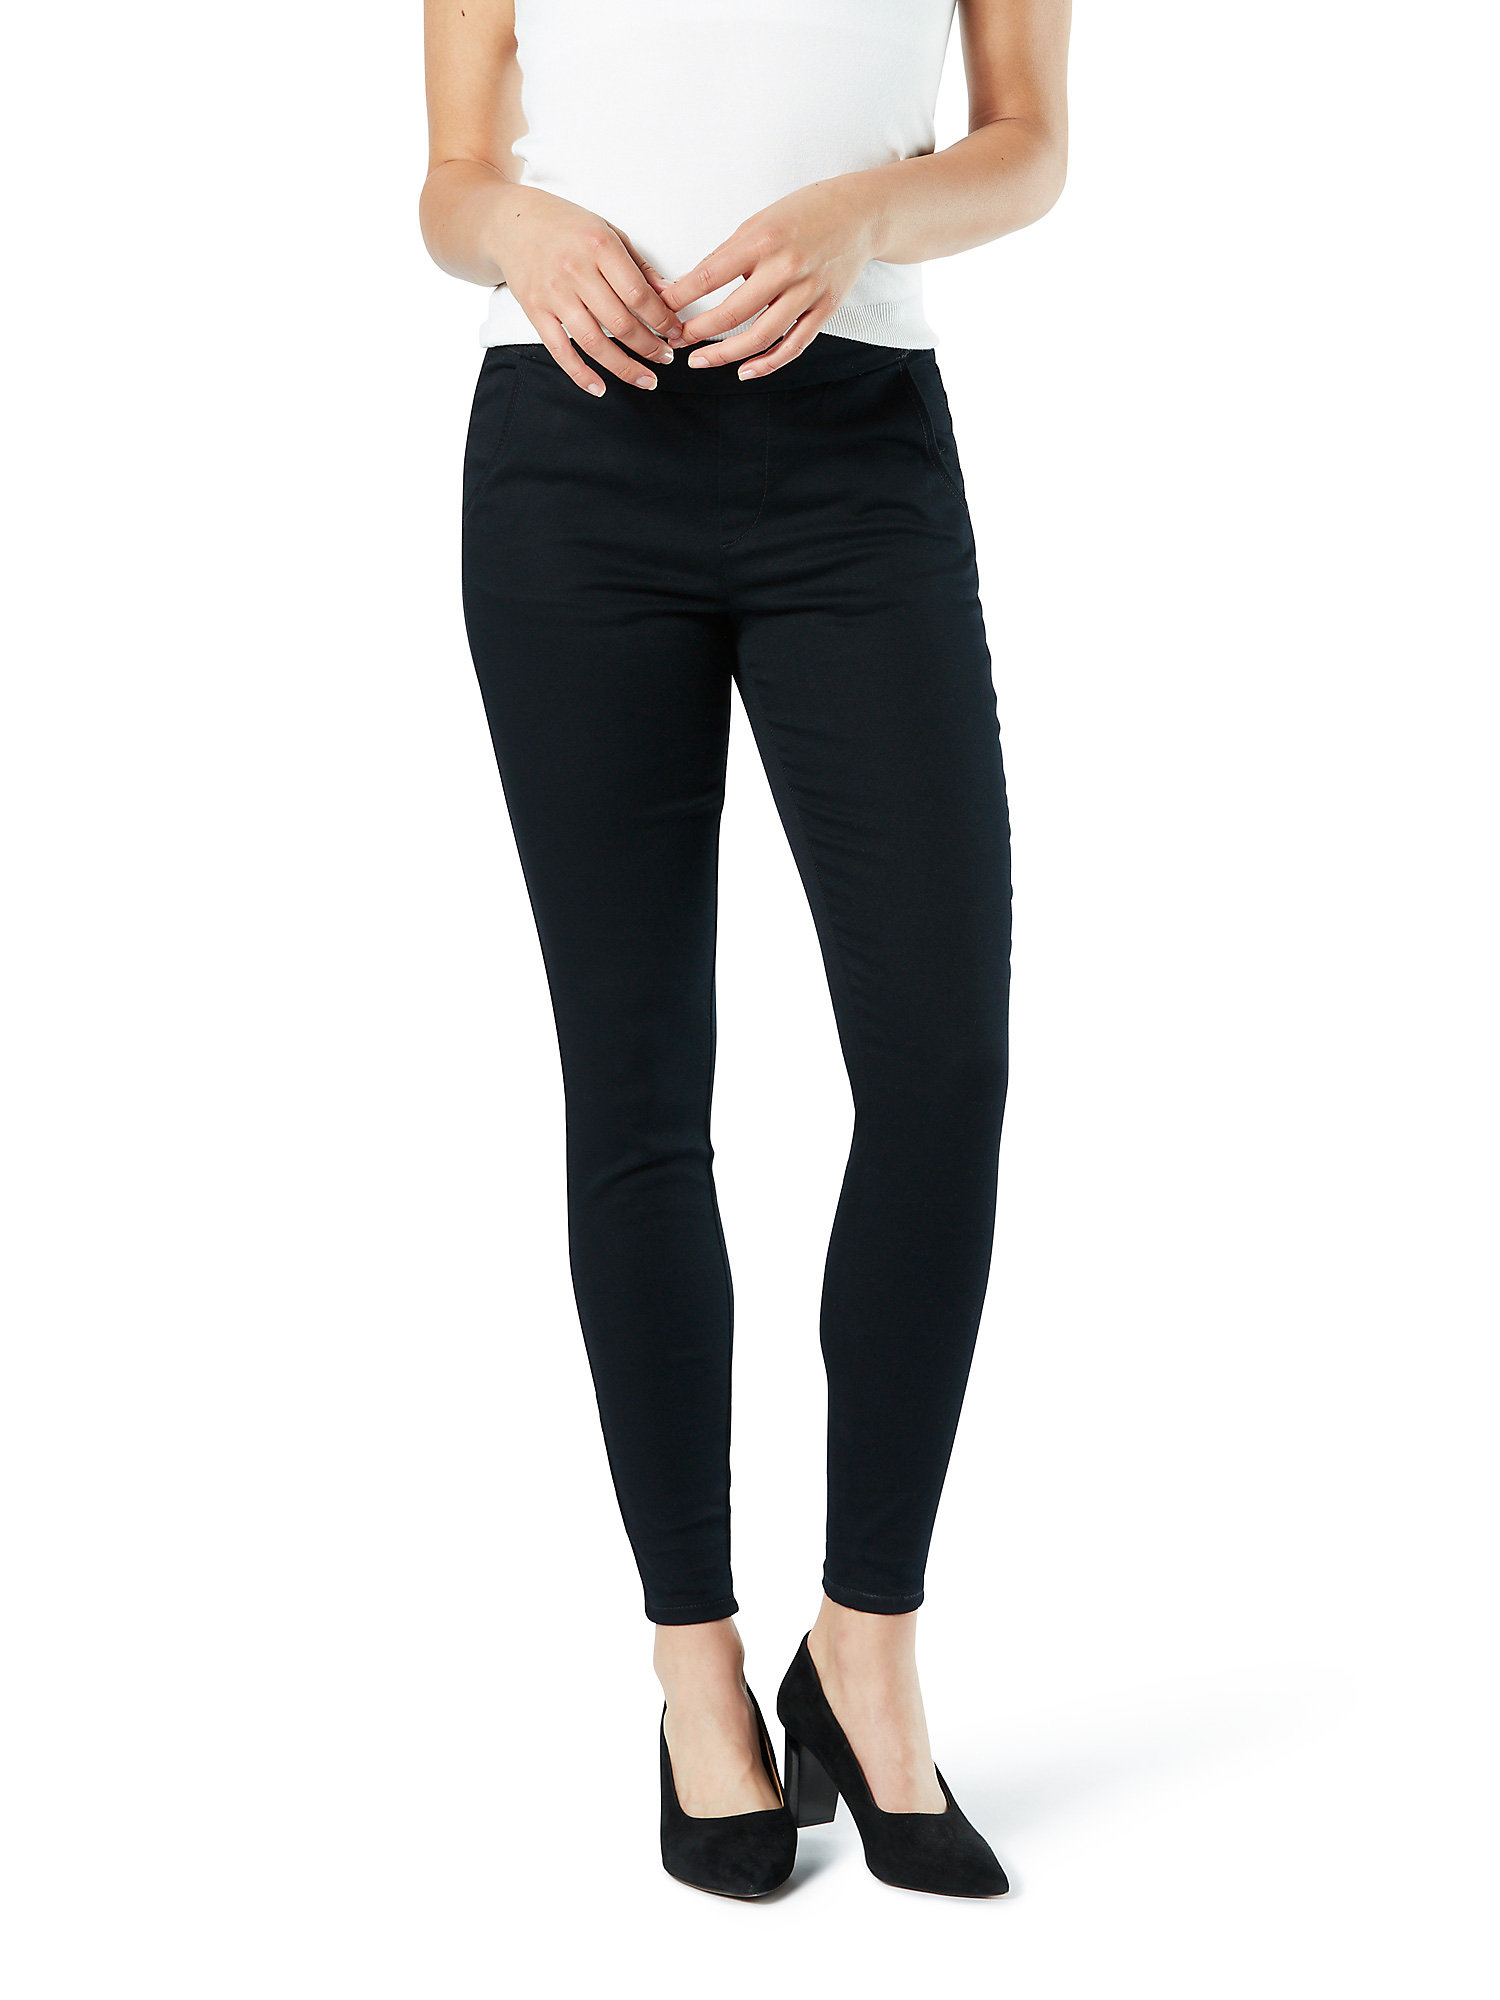 Signature by Levi Strauss & Co. Women's Modern Pull On Ankle Jegging - image 1 of 5